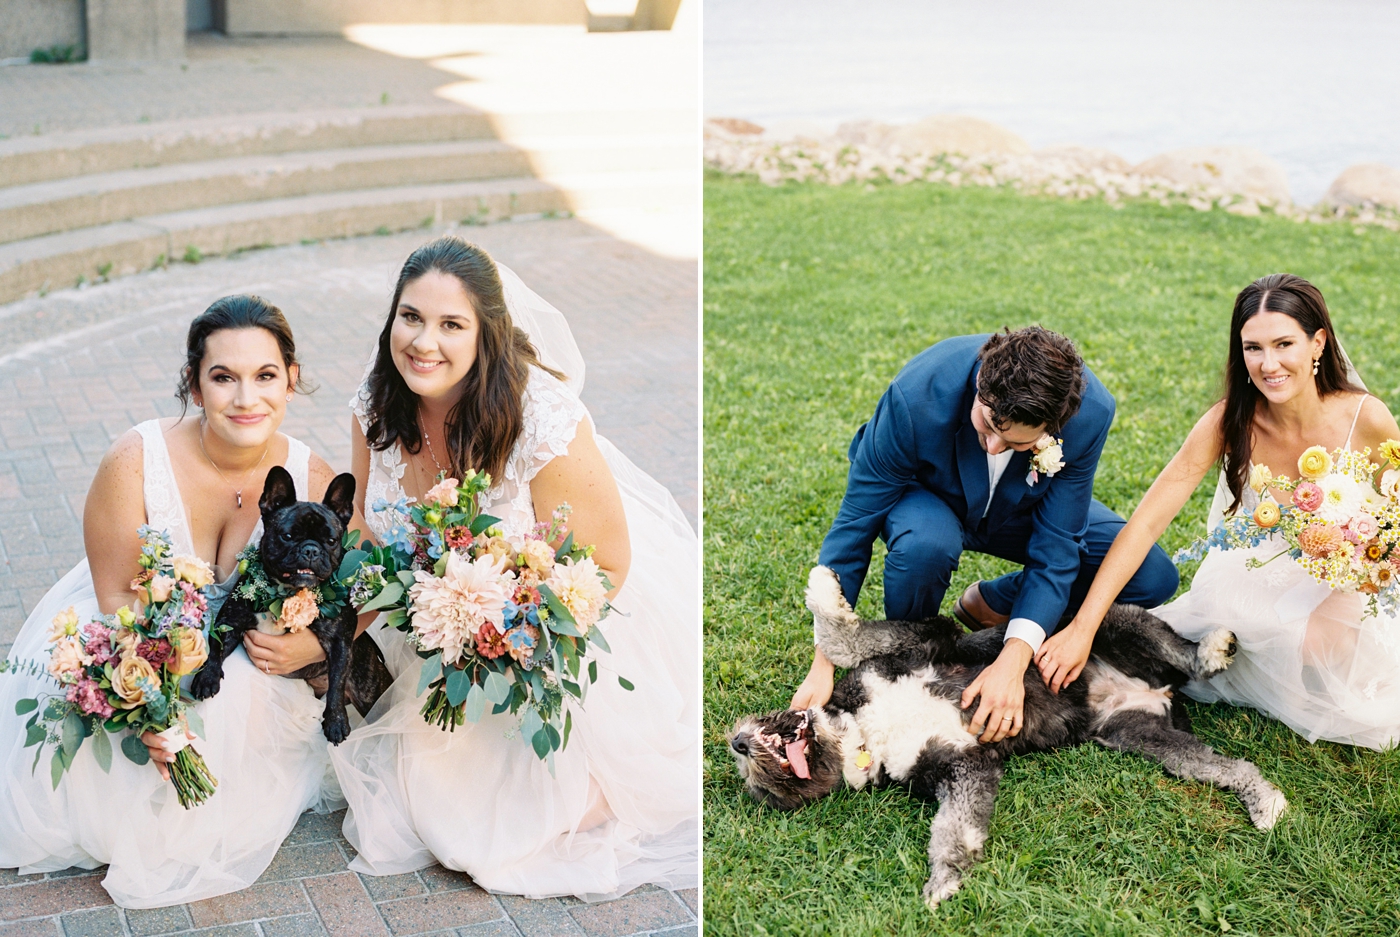 How to include your dog in your wedding or engagement session - Alyssa Joy Photography